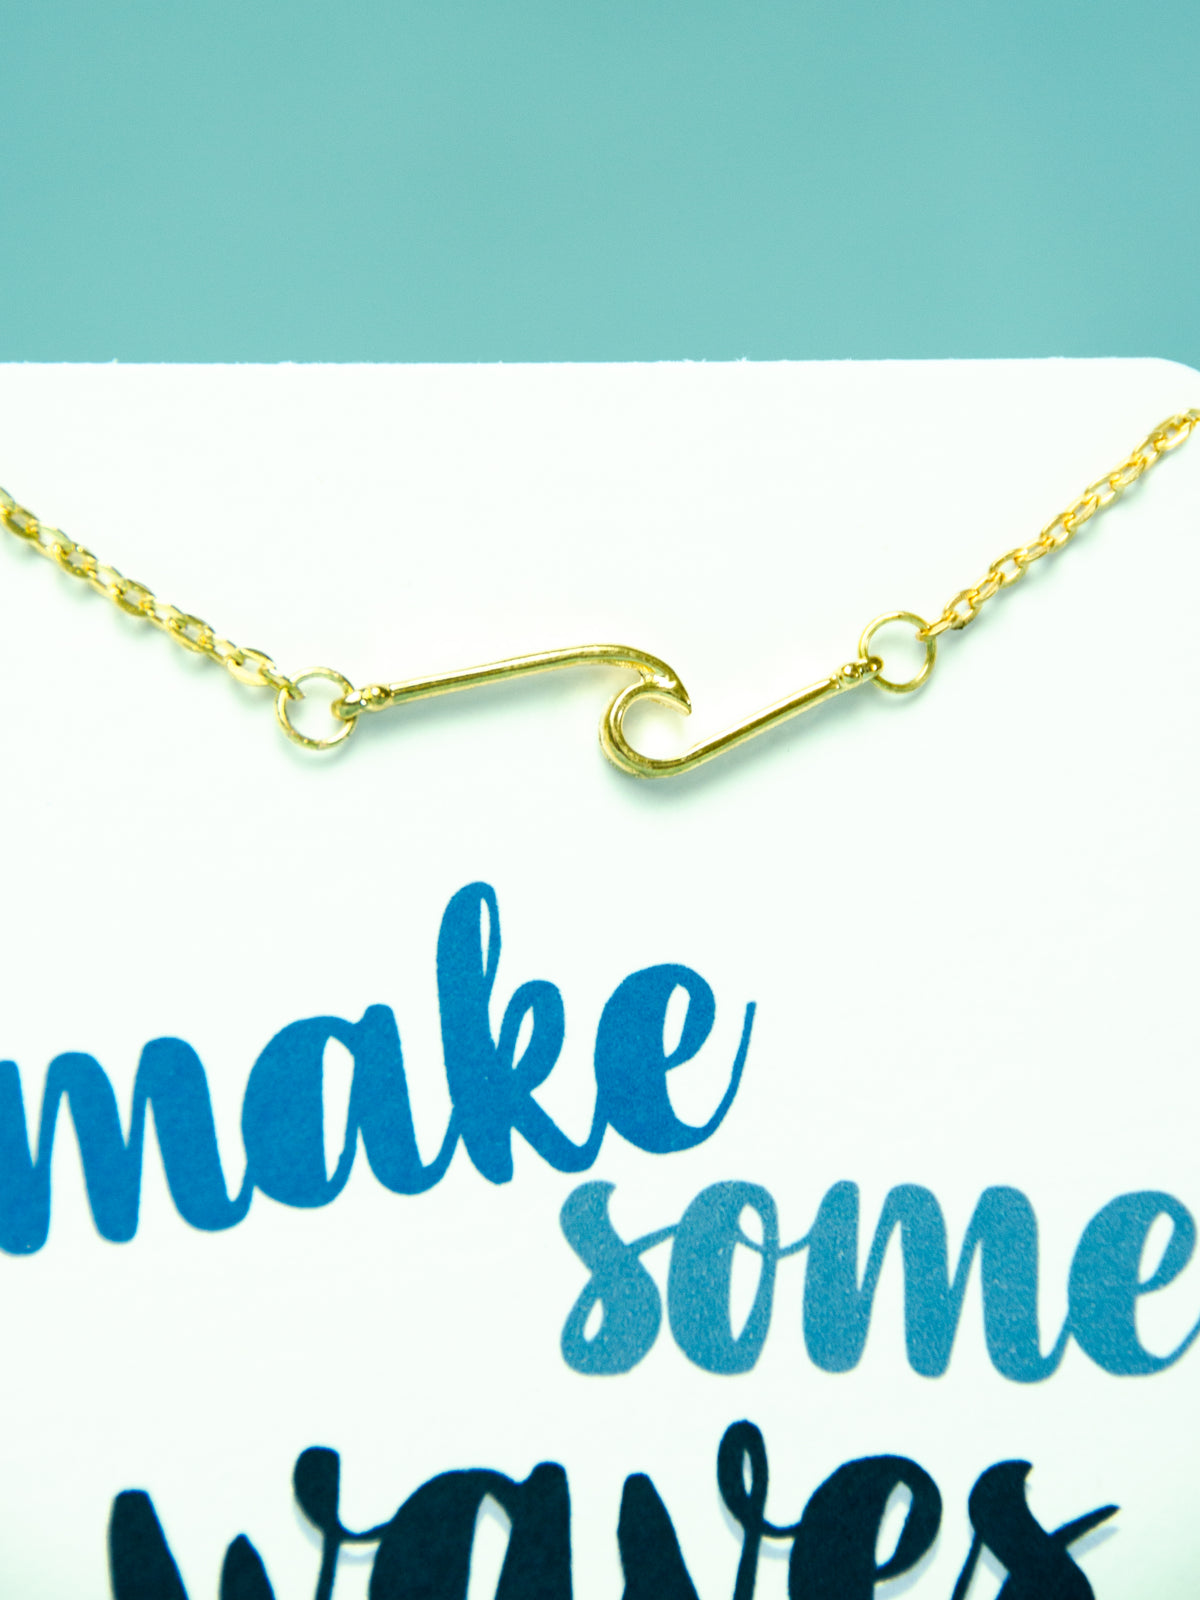 make some waves card with gold wave necklace